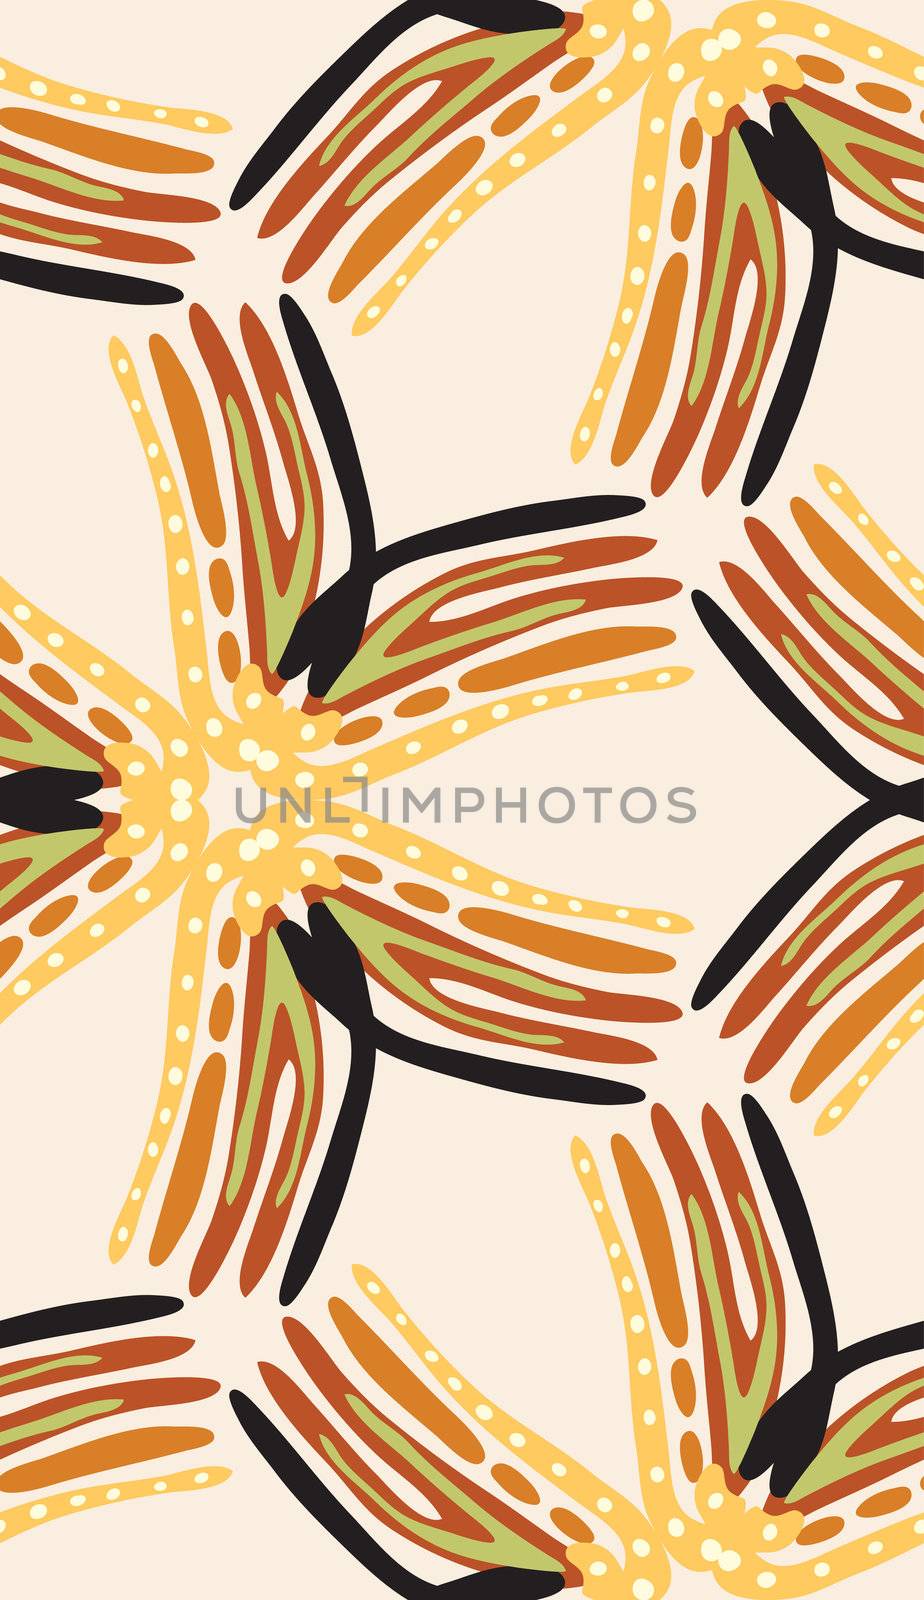 Brown and black pinwheel shapes in seamless background pattern